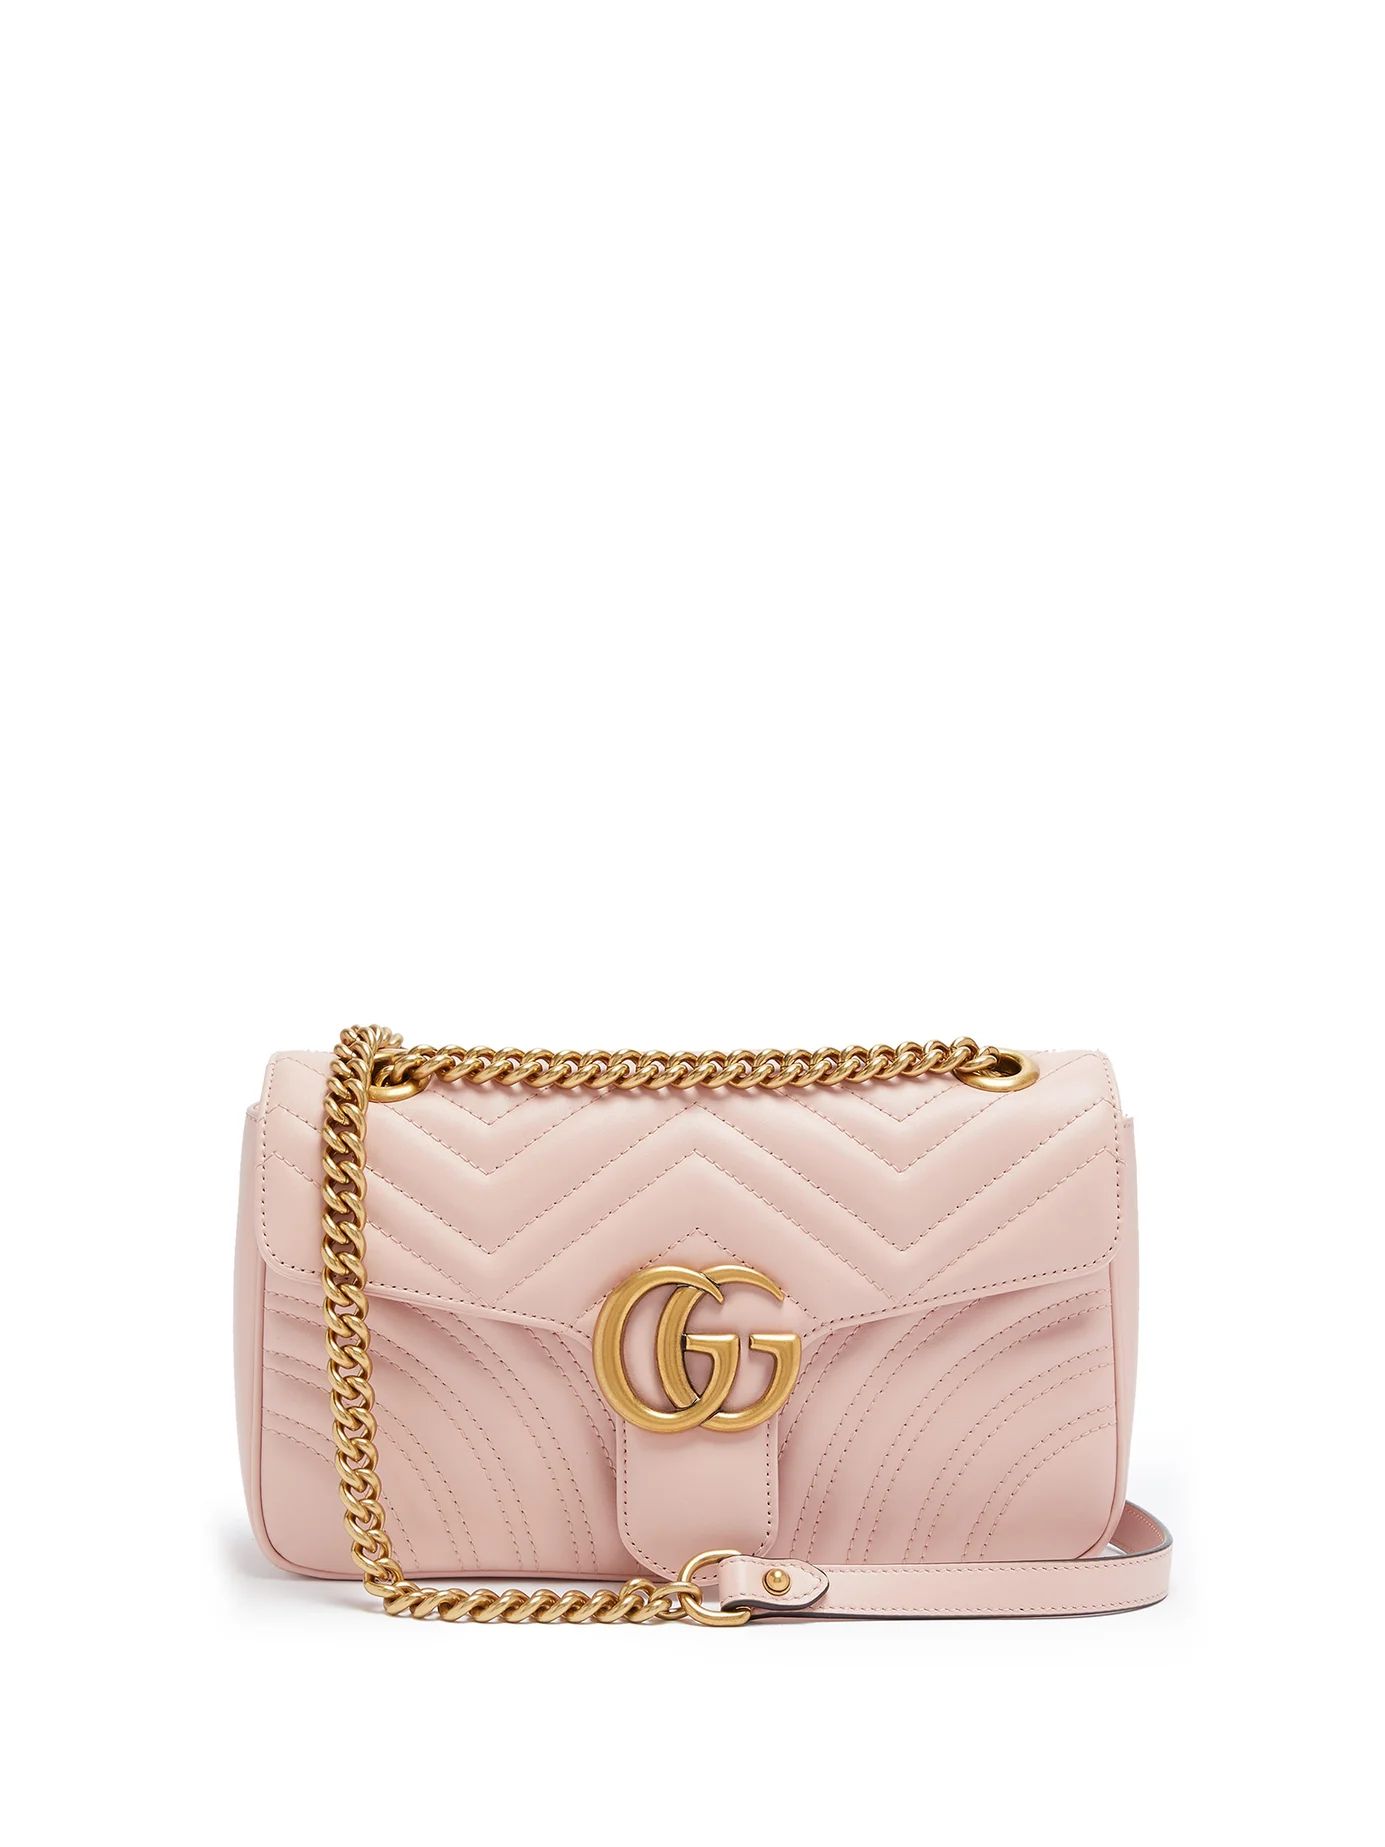 GG Marmont small quilted-leather shoulder bag | Matches (US)